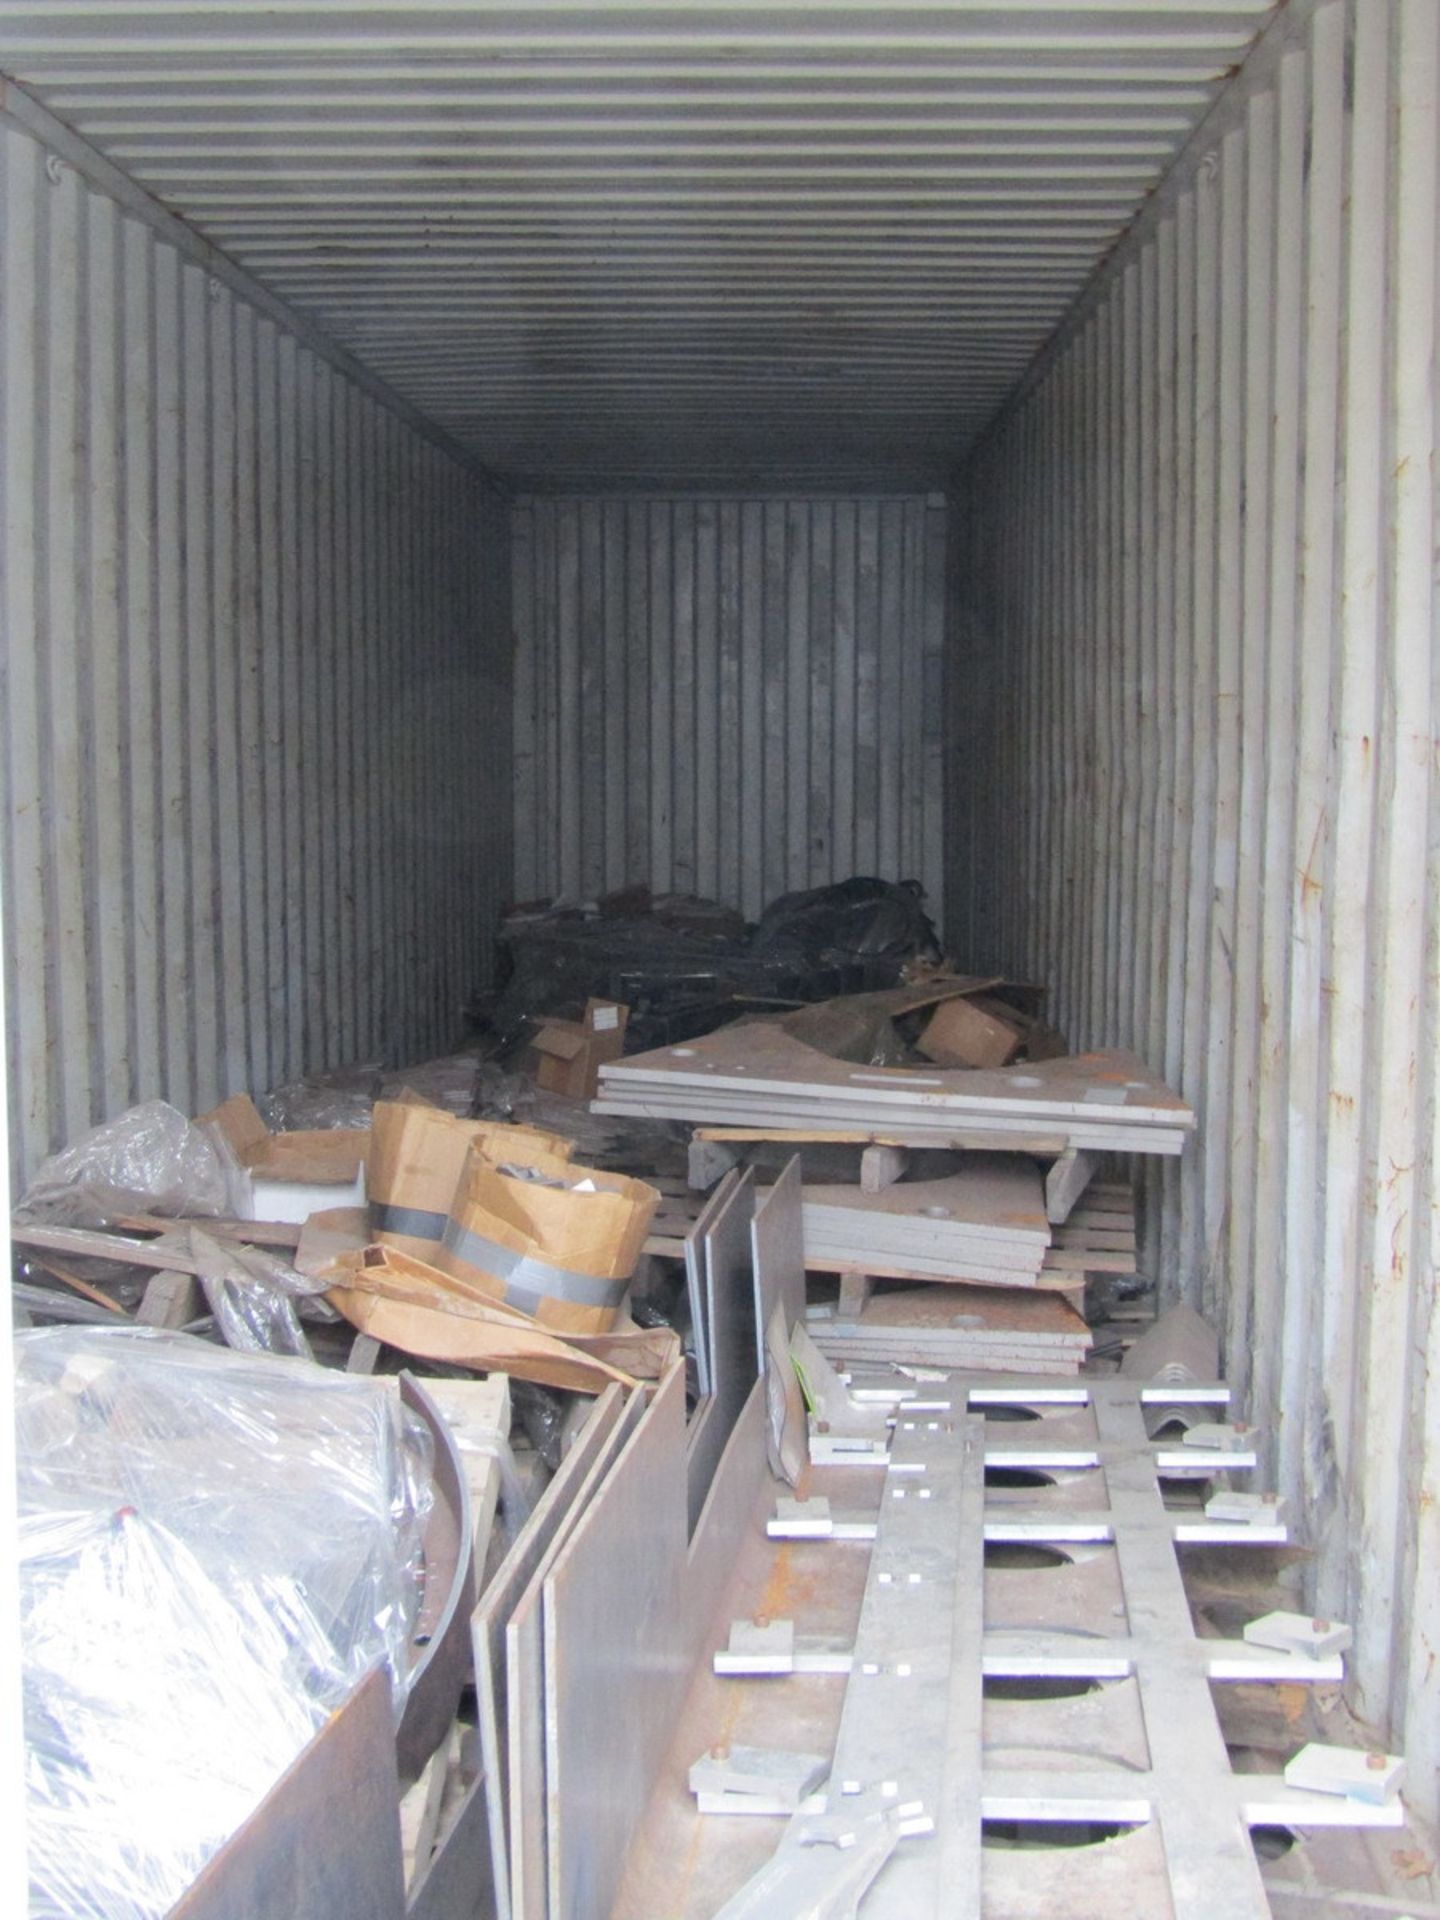 Shipping Container - approx O/A 40’ x 8’ w x 8’ 6” h - Image 2 of 3